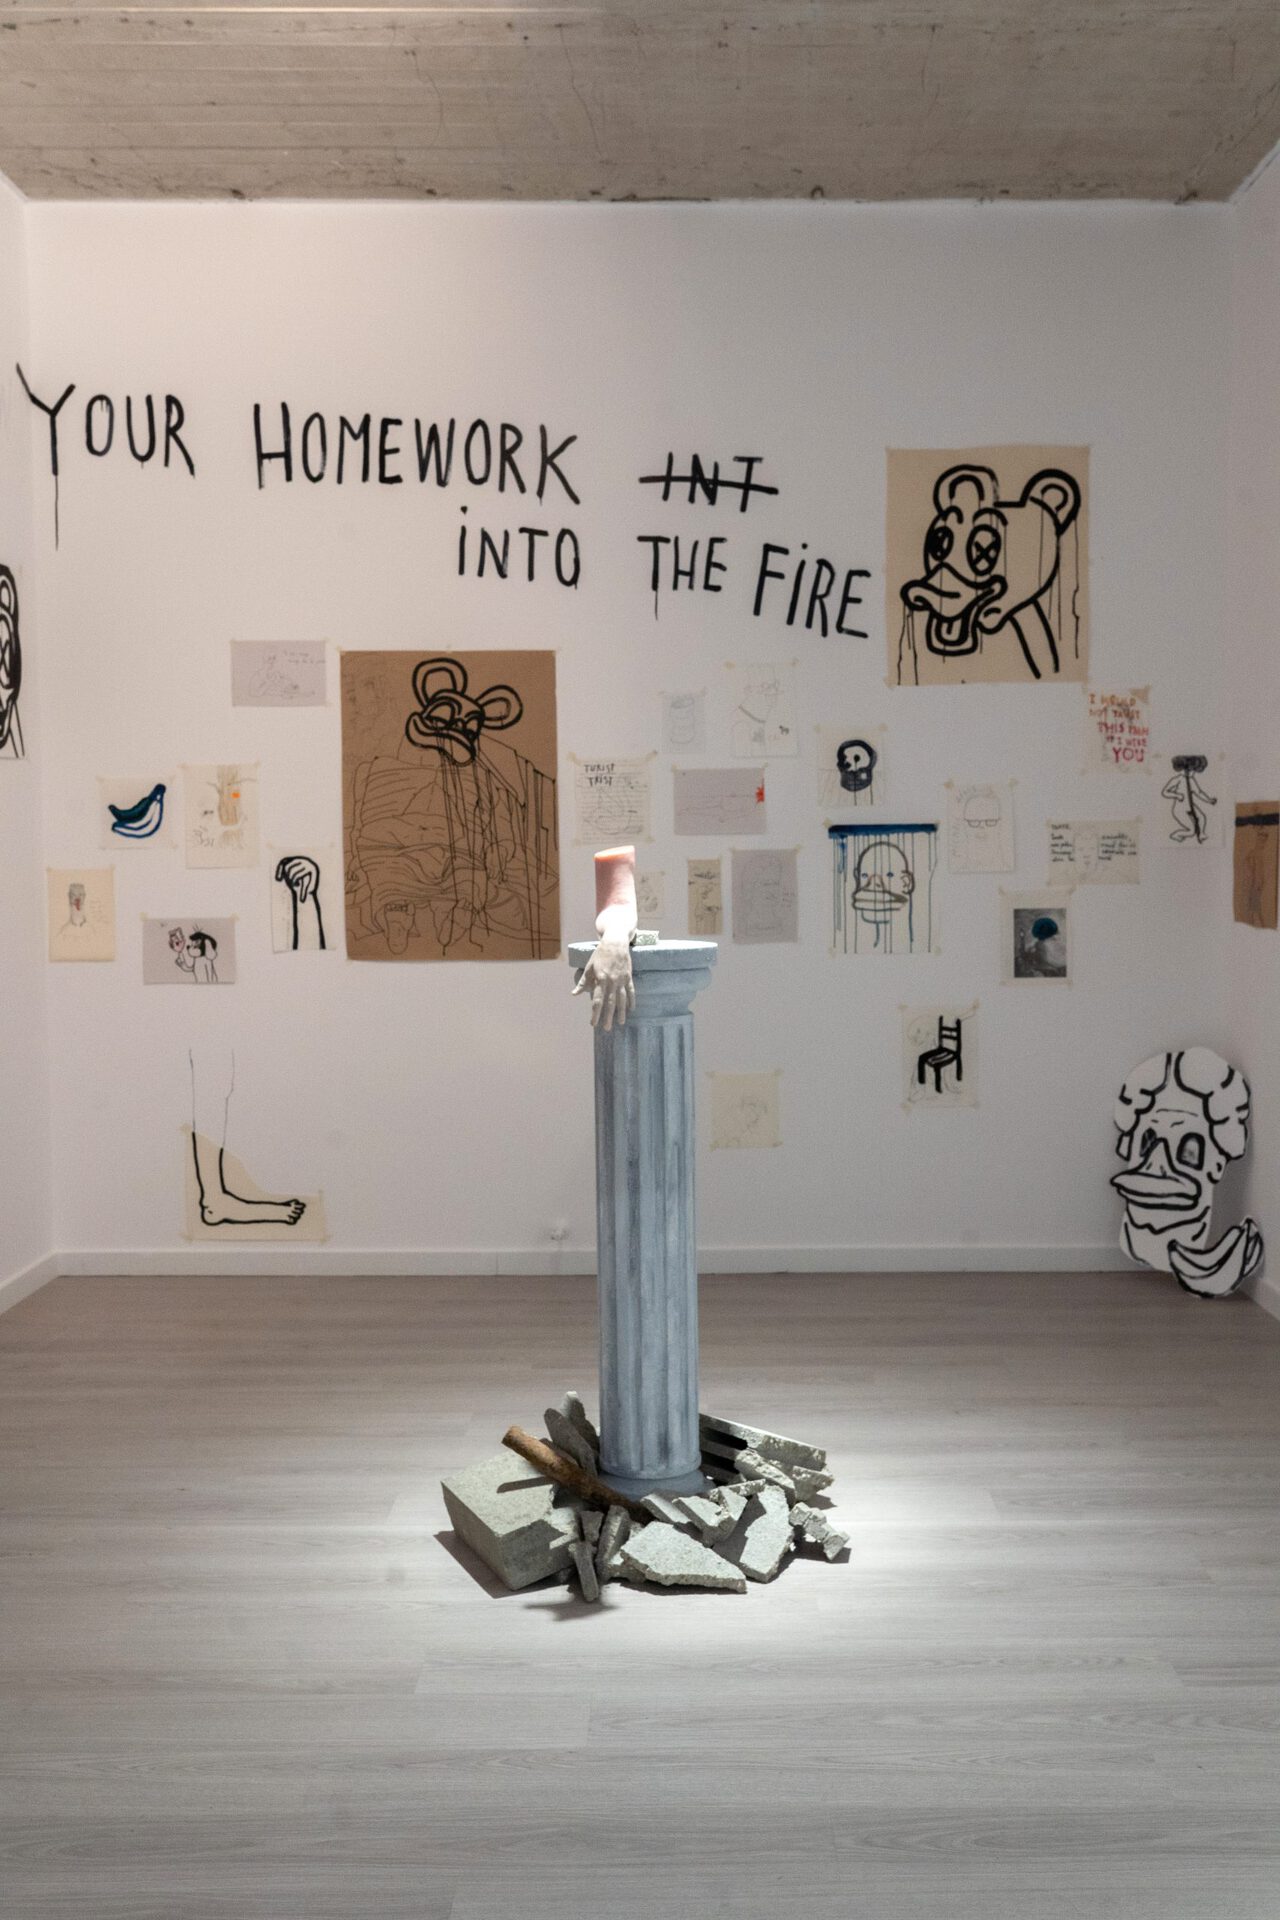 Exhibition view. Lea Rasovszky, Ode to My Left Hand, 2020, in-situ installation (drawing, painting, object, text intervention). Photo credit: infi.ro